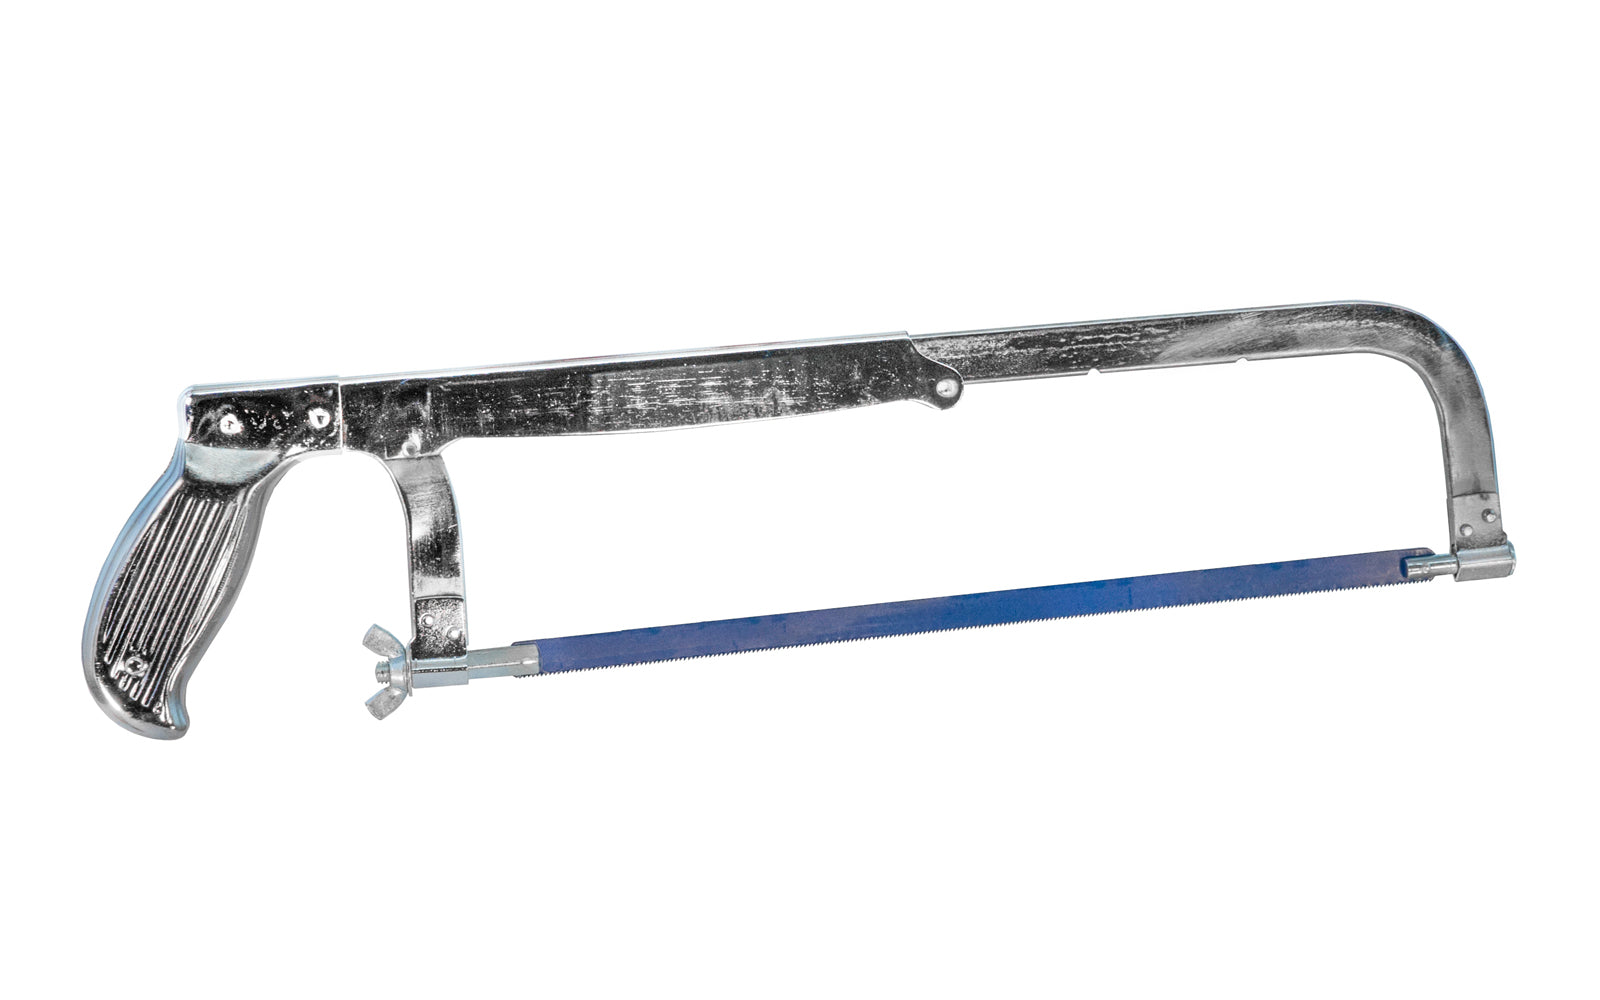 An Adjustable Frame Pistol Grip Hacksaw is ideal for cutting glass, ceramic tile, hardened steel or bone, & variety of other materials at home or on a job site. Its four cutting positions & 3" cutting depth offer a range of applications. Frame is made of steel with chrome plating & can accept 10" & 12" hacksaw blades